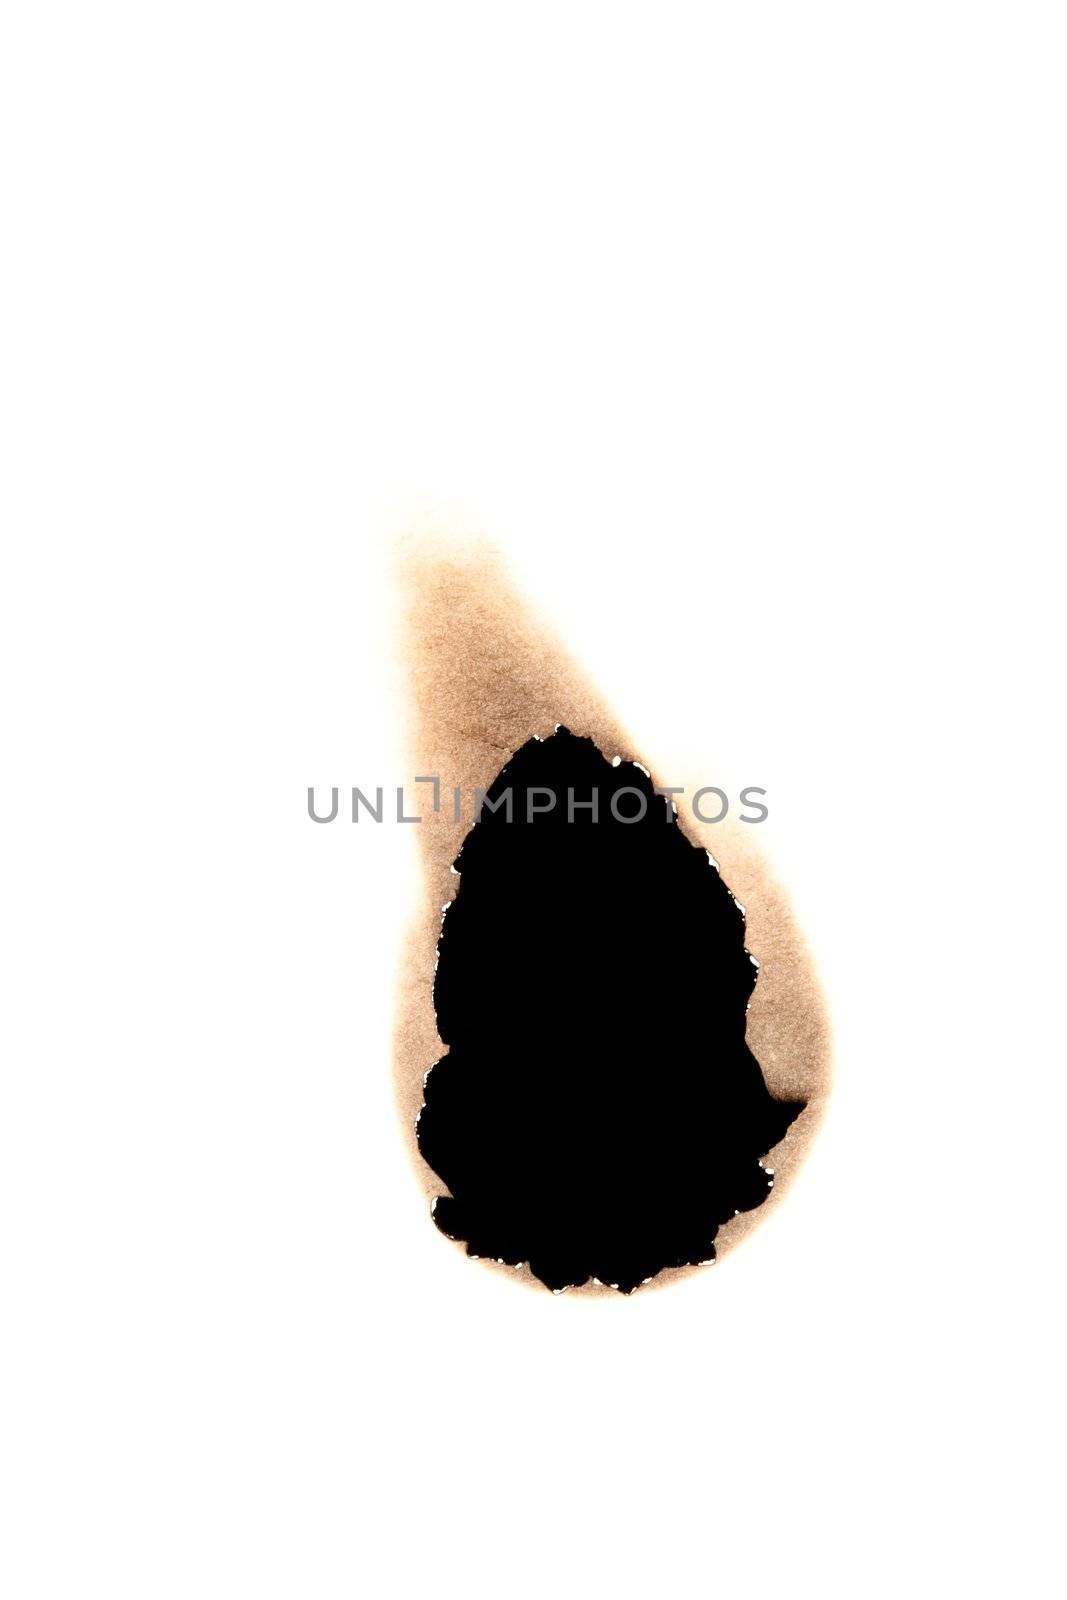 Small burned hole in paper against a white background